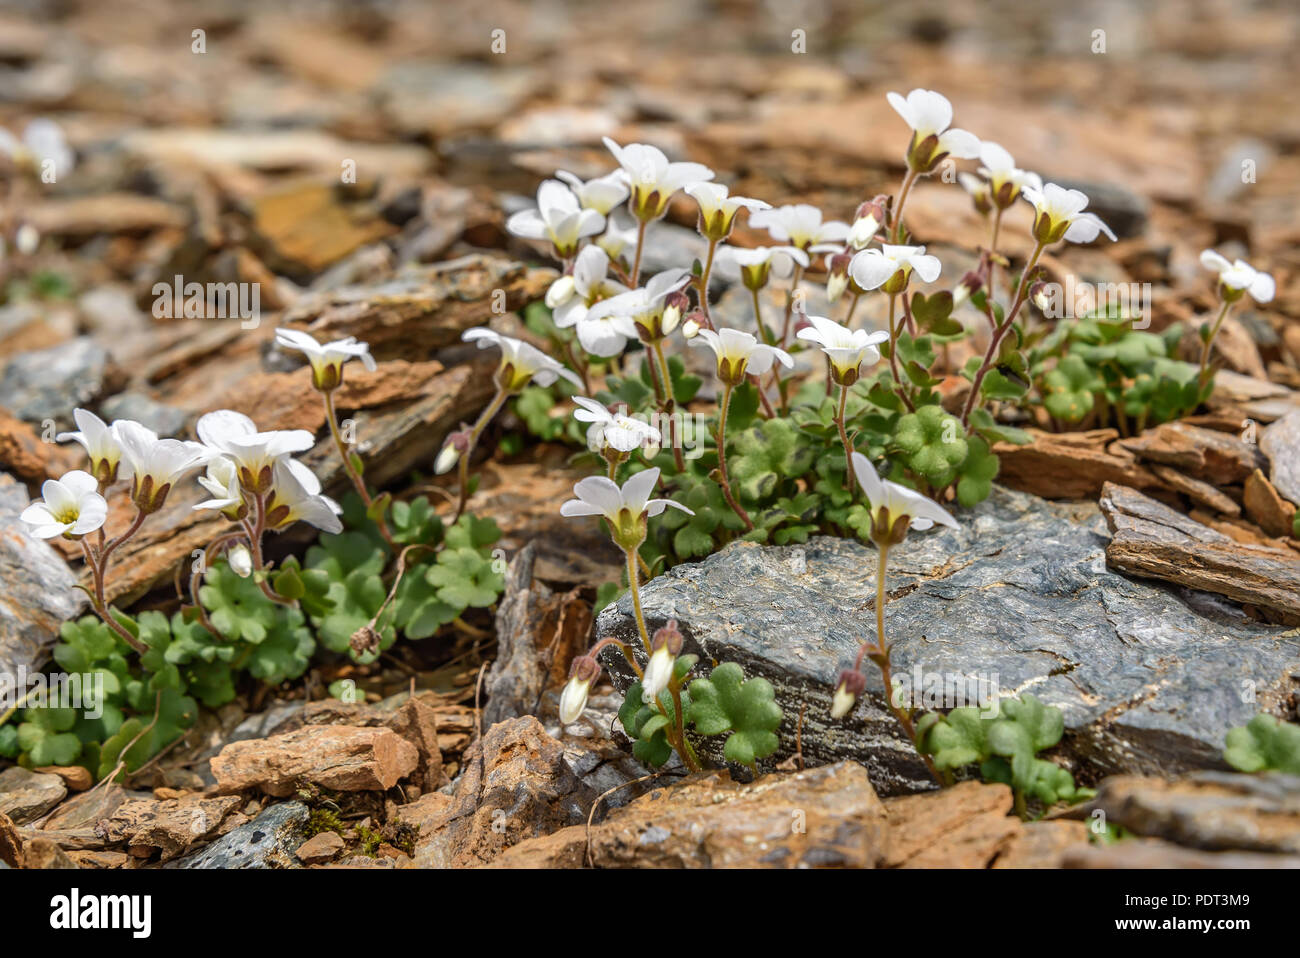 Beautiful delicate white exotic saxifraga flowers (Saxifraga sibirica) growing on stones high in the mountains close up Stock Photo